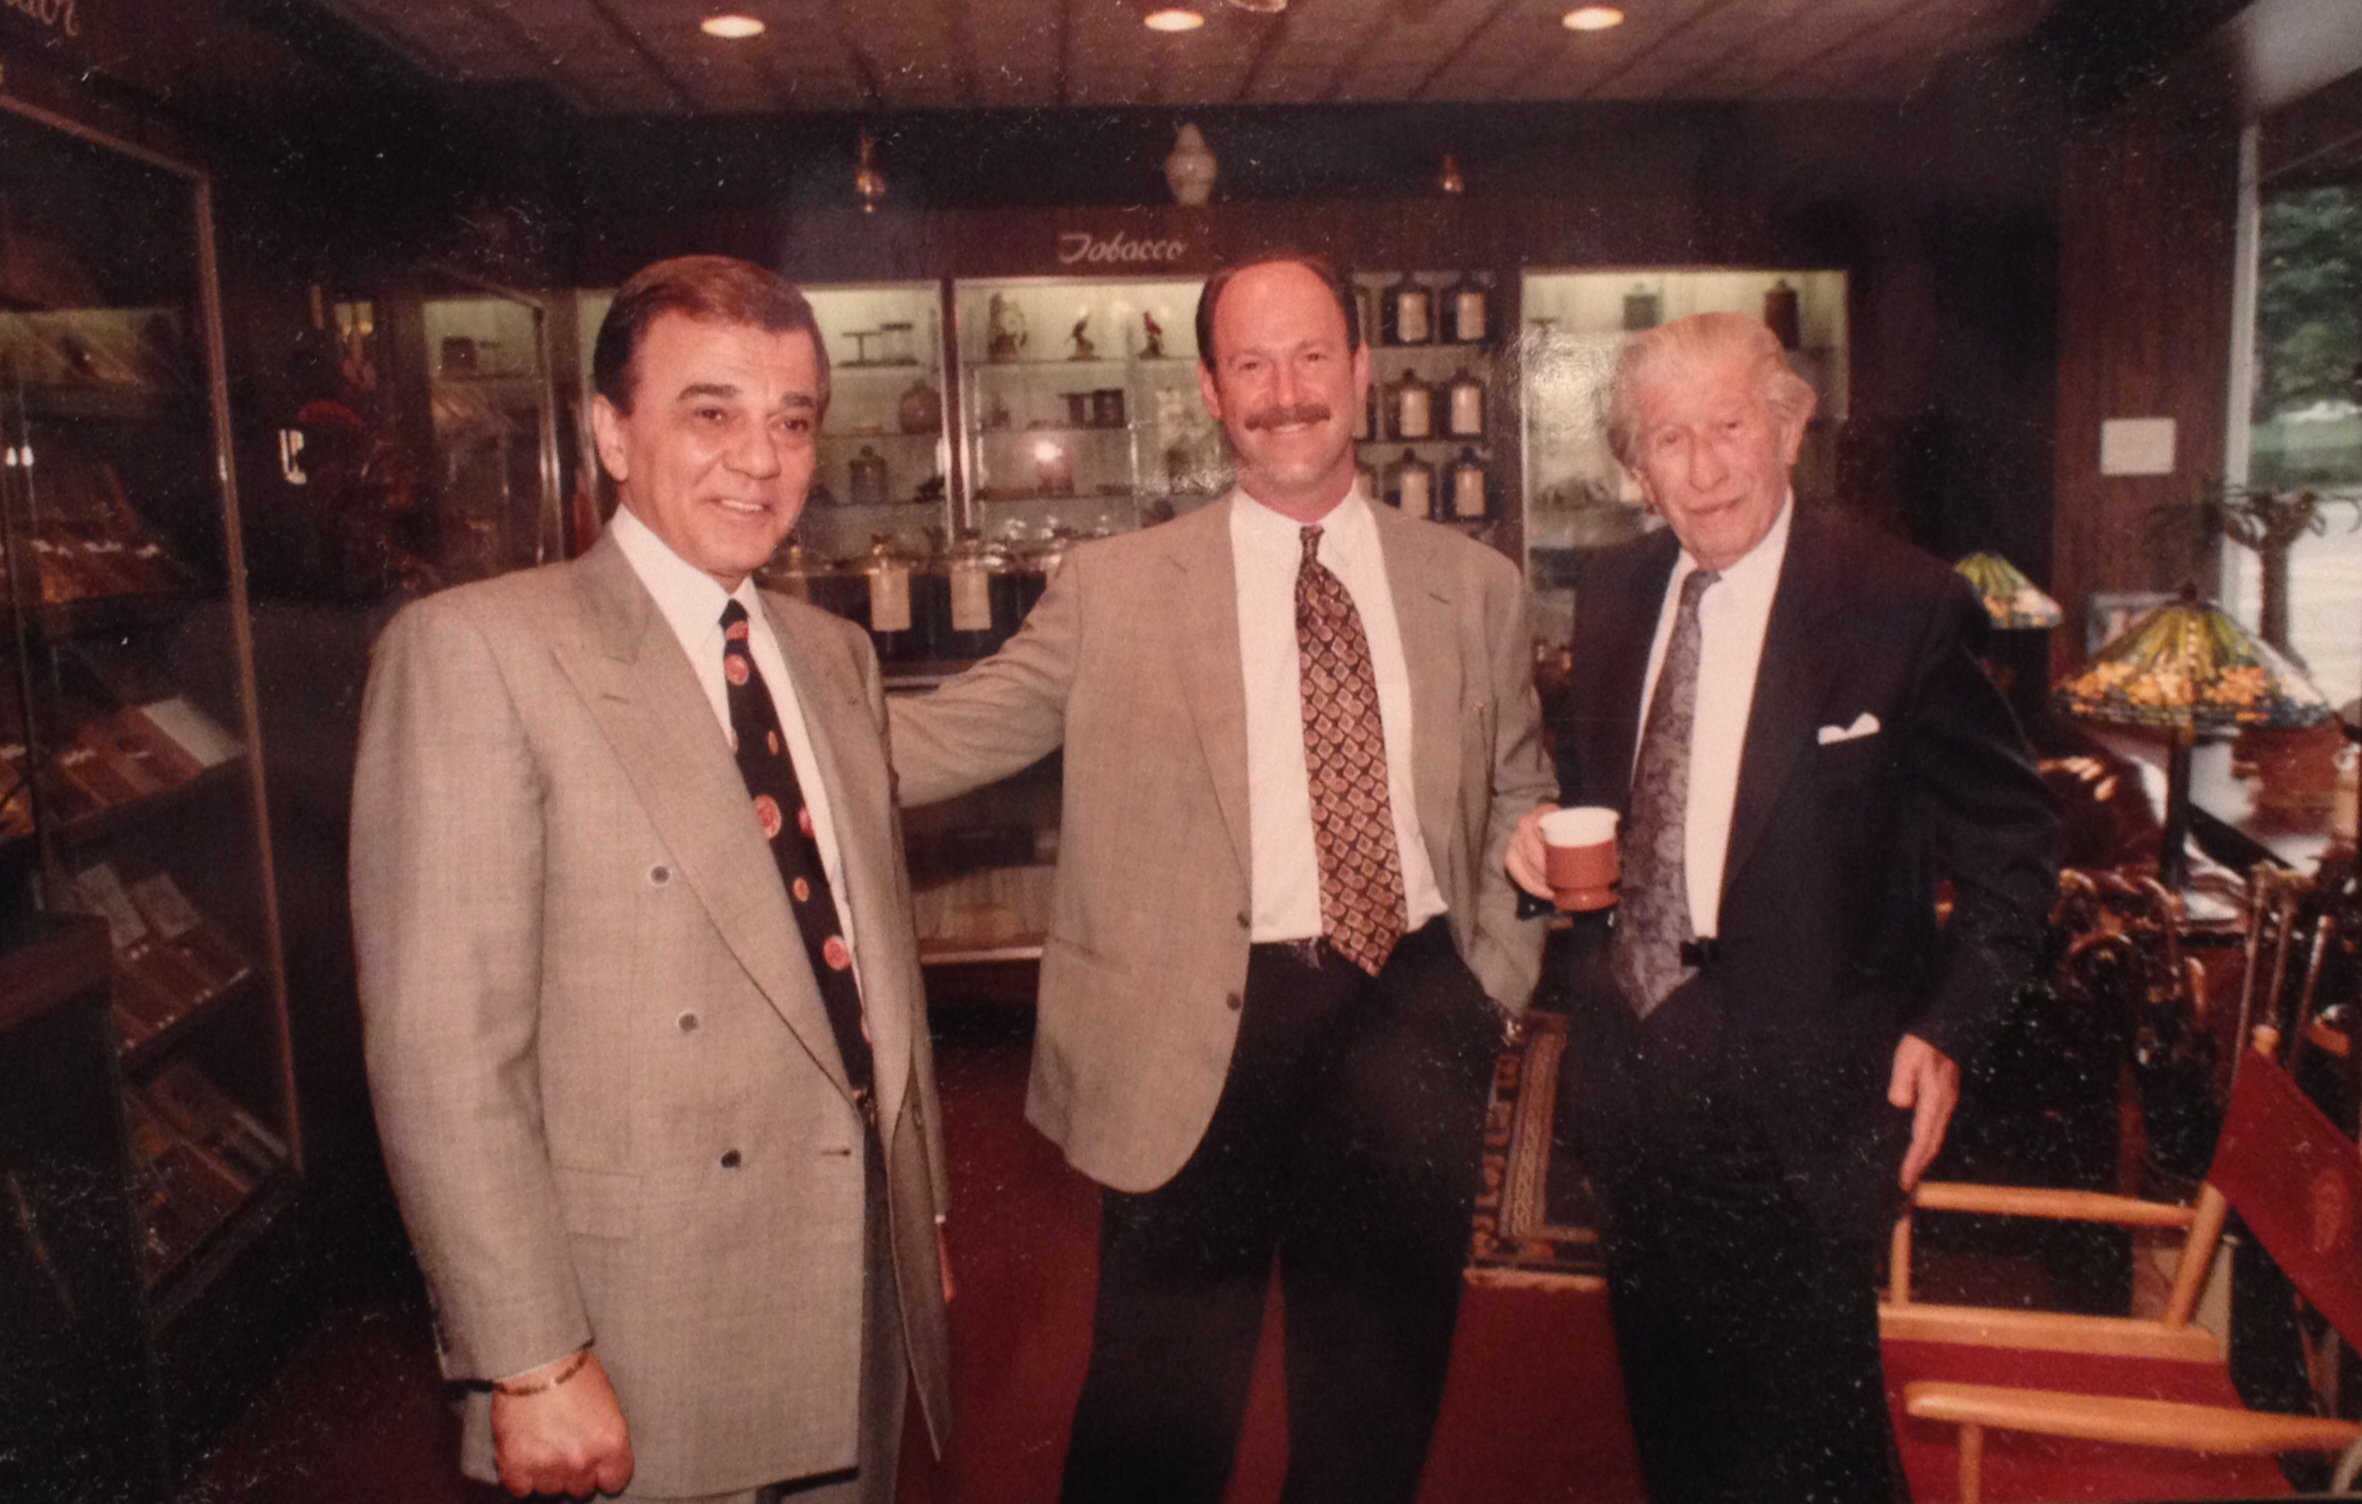 Tobacconist owner looks back at lessons learned from his mentor